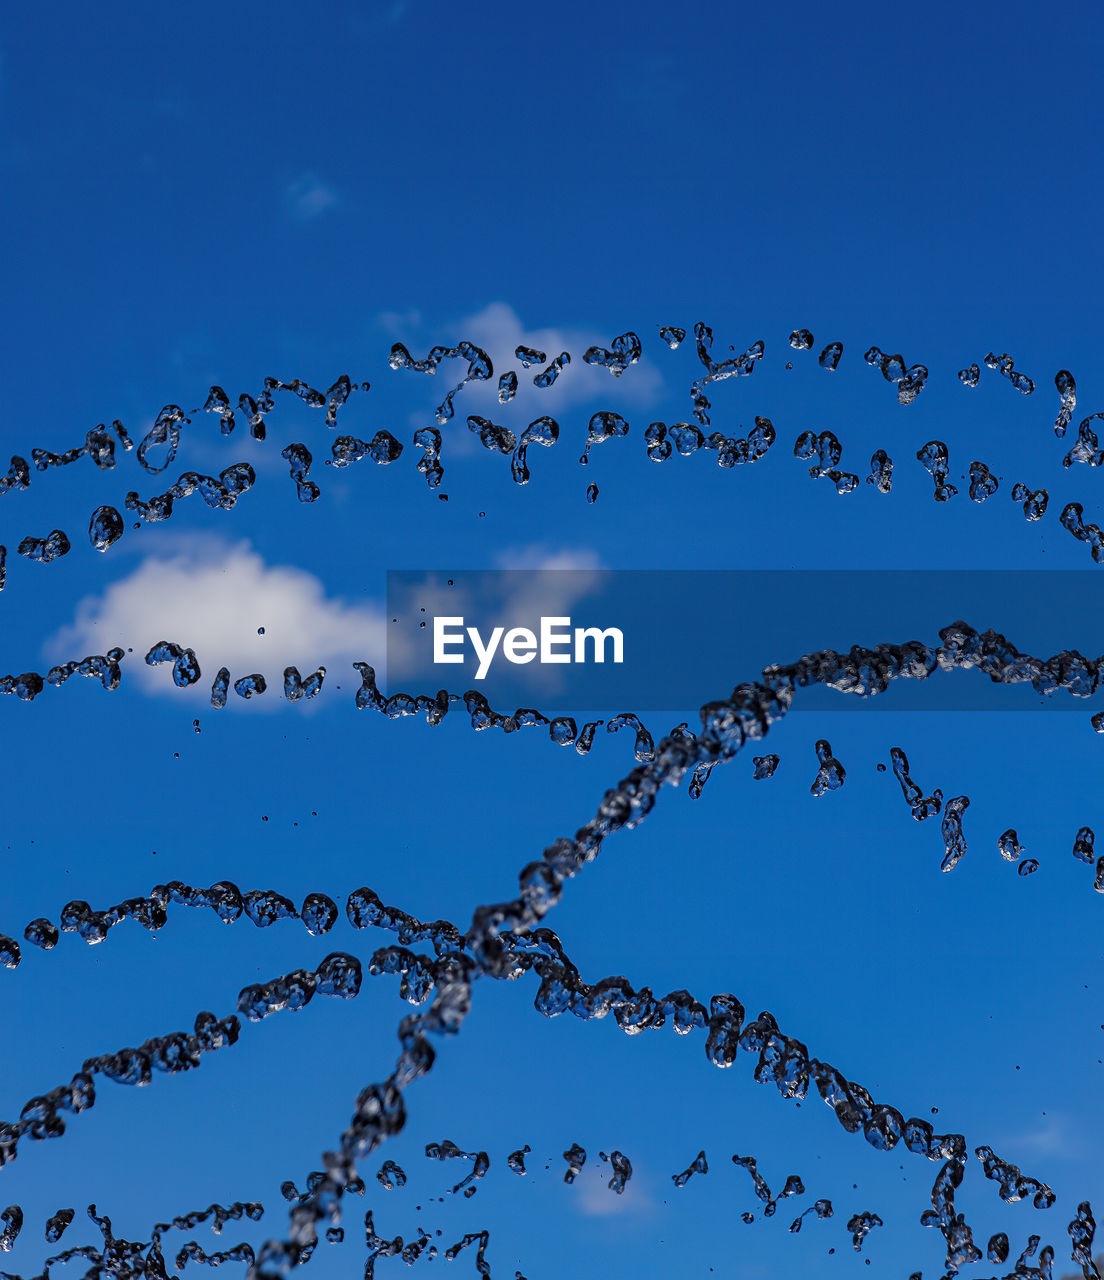 sky, flock, blue, flock of birds, large group of animals, animal, animal themes, wildlife, animal wildlife, nature, no people, group of animals, bird, branch, animal migration, flying, bird migration, clear sky, cloud, beauty in nature, outdoors, low angle view, line, motion, day, environment